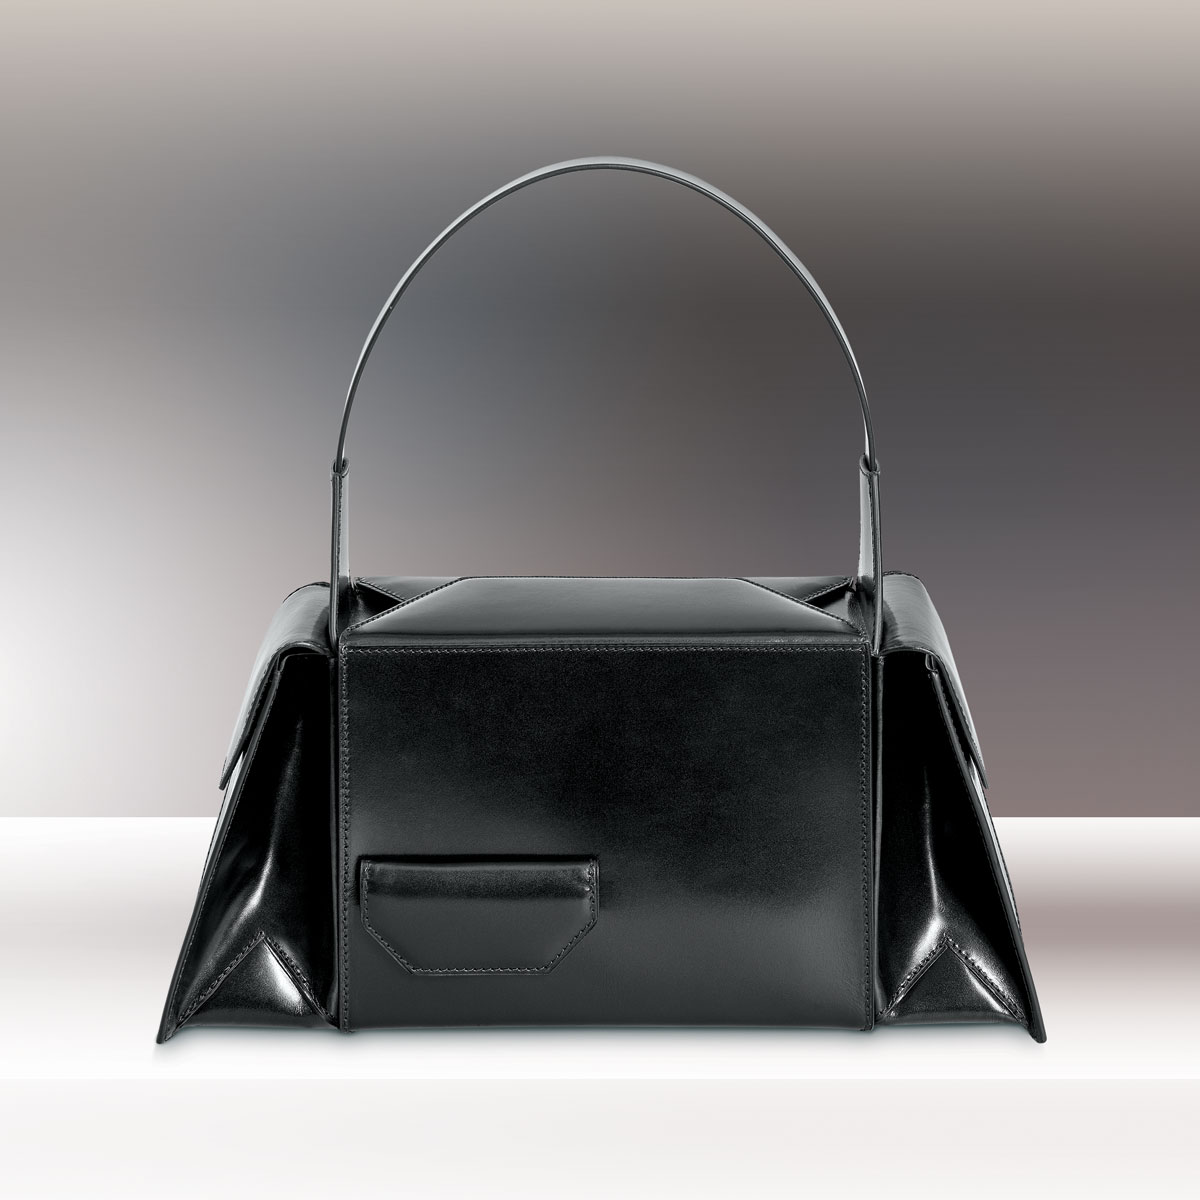 Merryl Tielman, Barbara bag: an elegant yet sturdy handbag with two large outside pockets to carry your things in an organized manner. Made in Italy, vegetable tanned cow leather, colour black.